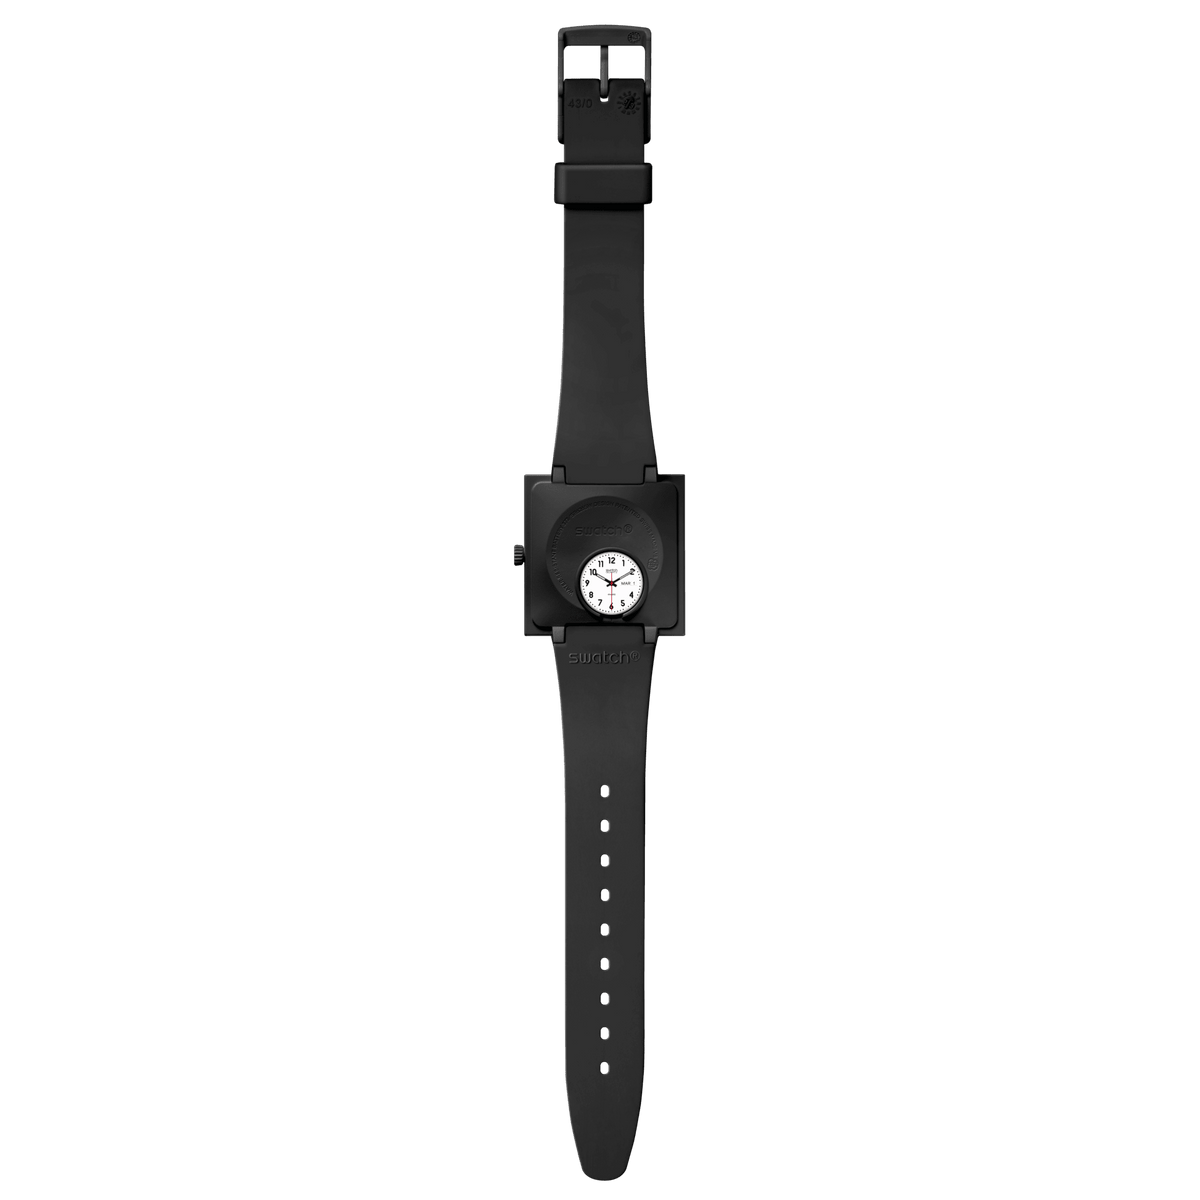 Swatch Watch - What if... Black?